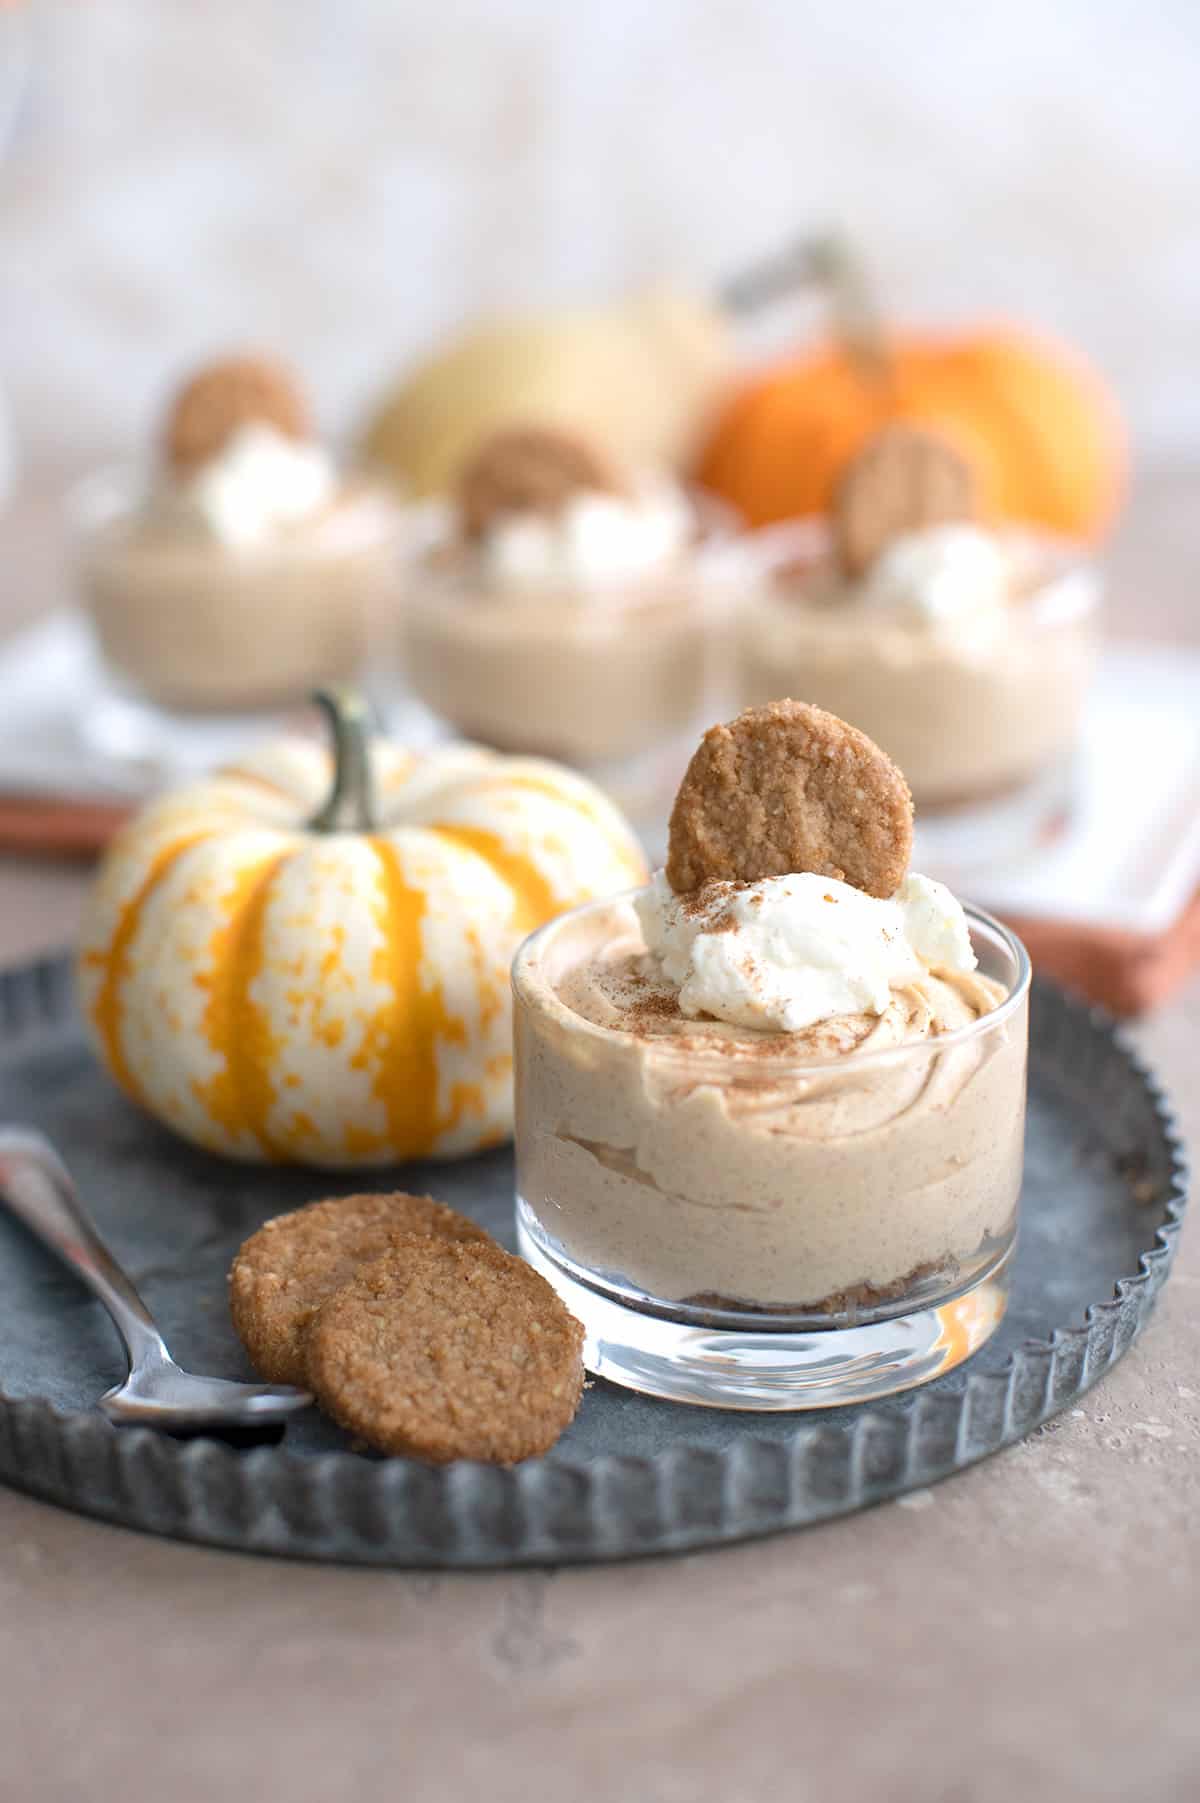 A jar filled with No Bake Keto Pumpkin Cheesecake on a pewter plate, with keto ginger cookies and a pumpkin.